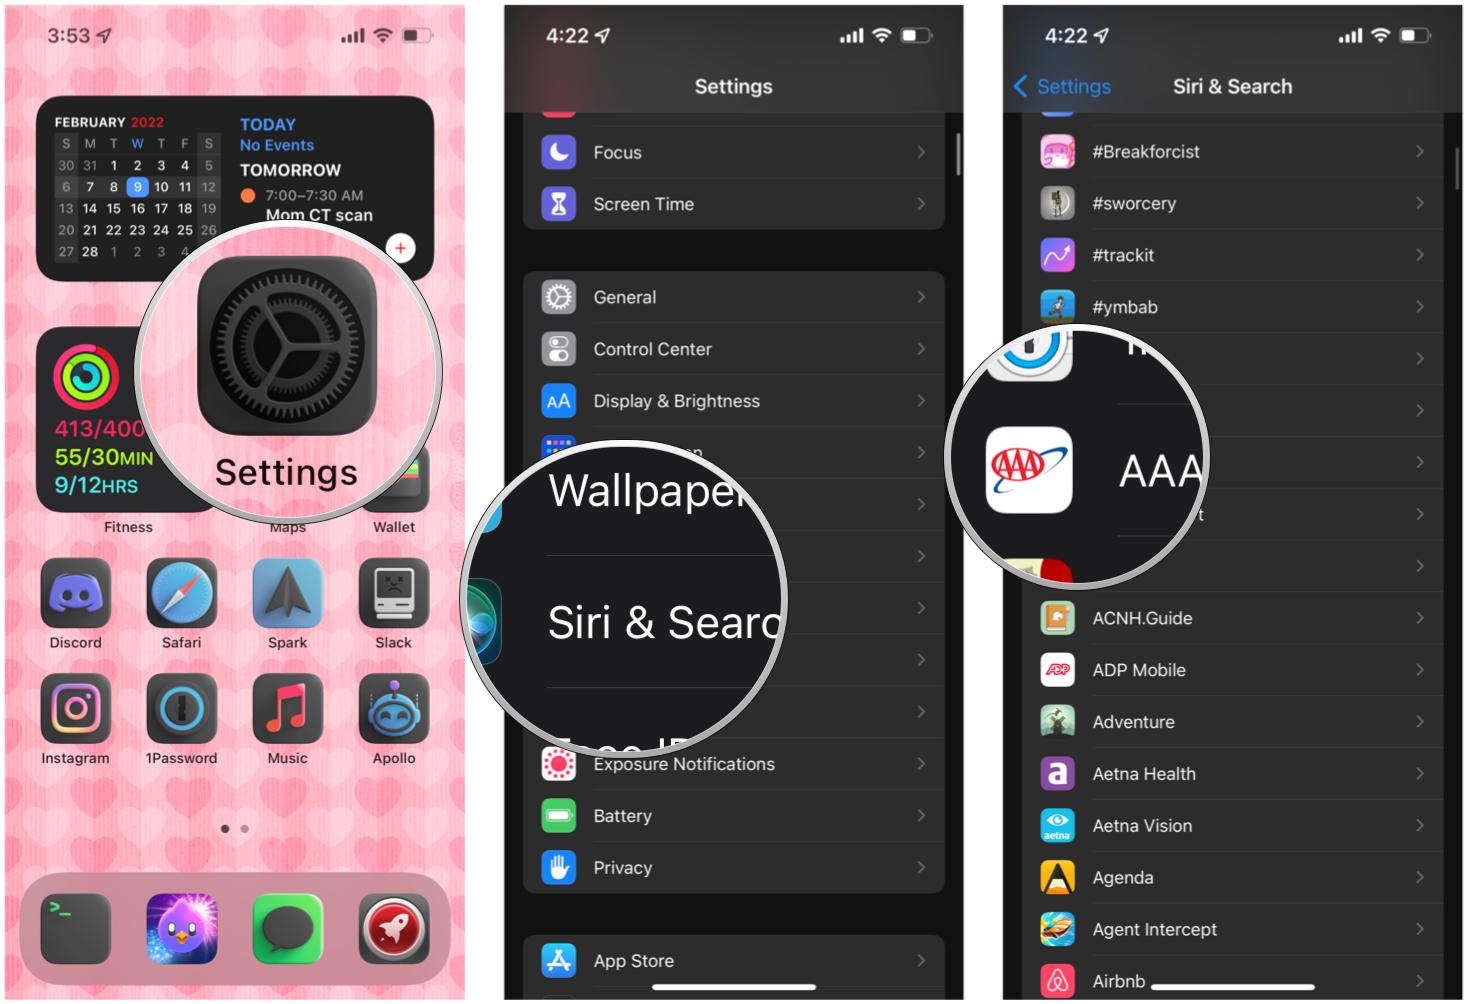 How to hide apps from iOS search on iPhone by showing: Launch Settings, tap Siri & Search, tap the app you want to hide